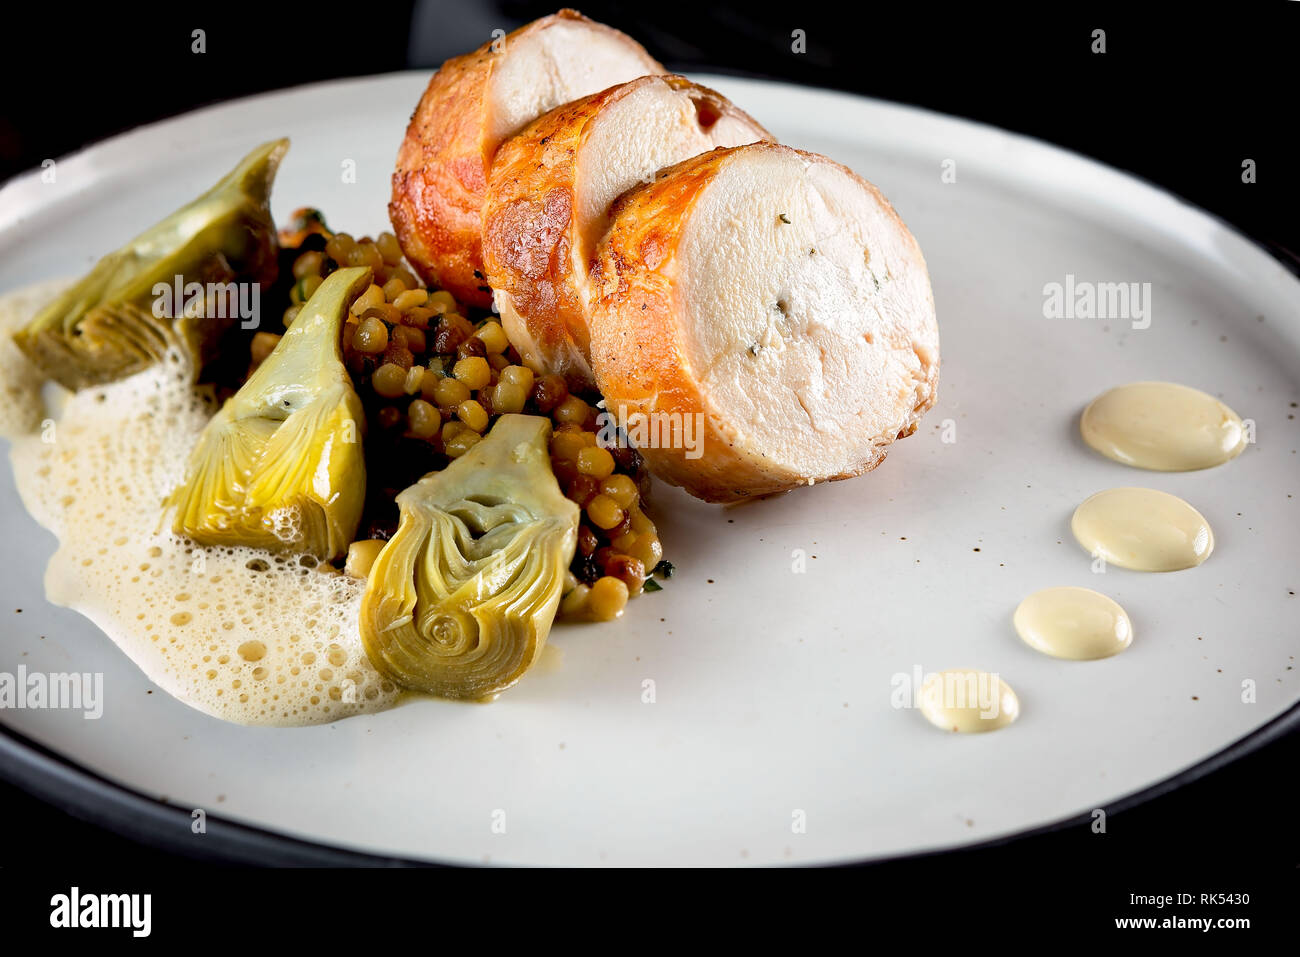 Chicken roulade with prosciutto, artichoke and emulsion on a white plate and black background Stock Photo